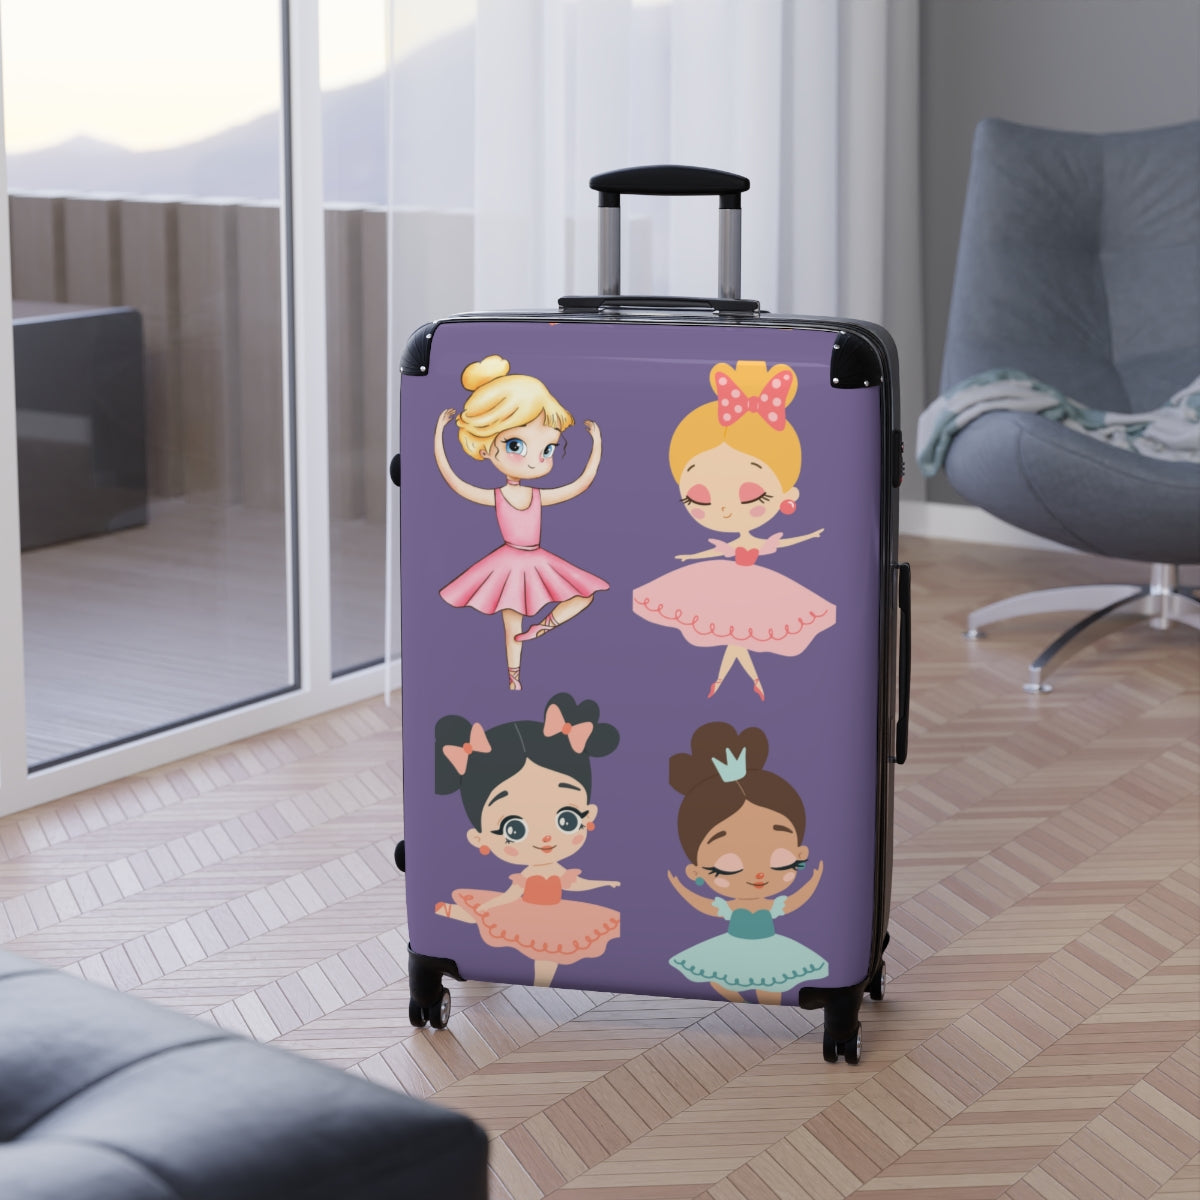 KIDS CARRY-ON Suitcases, Dolls Girls Cabin Suitcases, Kids Luggage With Wheels, Spinner, Combination Lock | Artzira